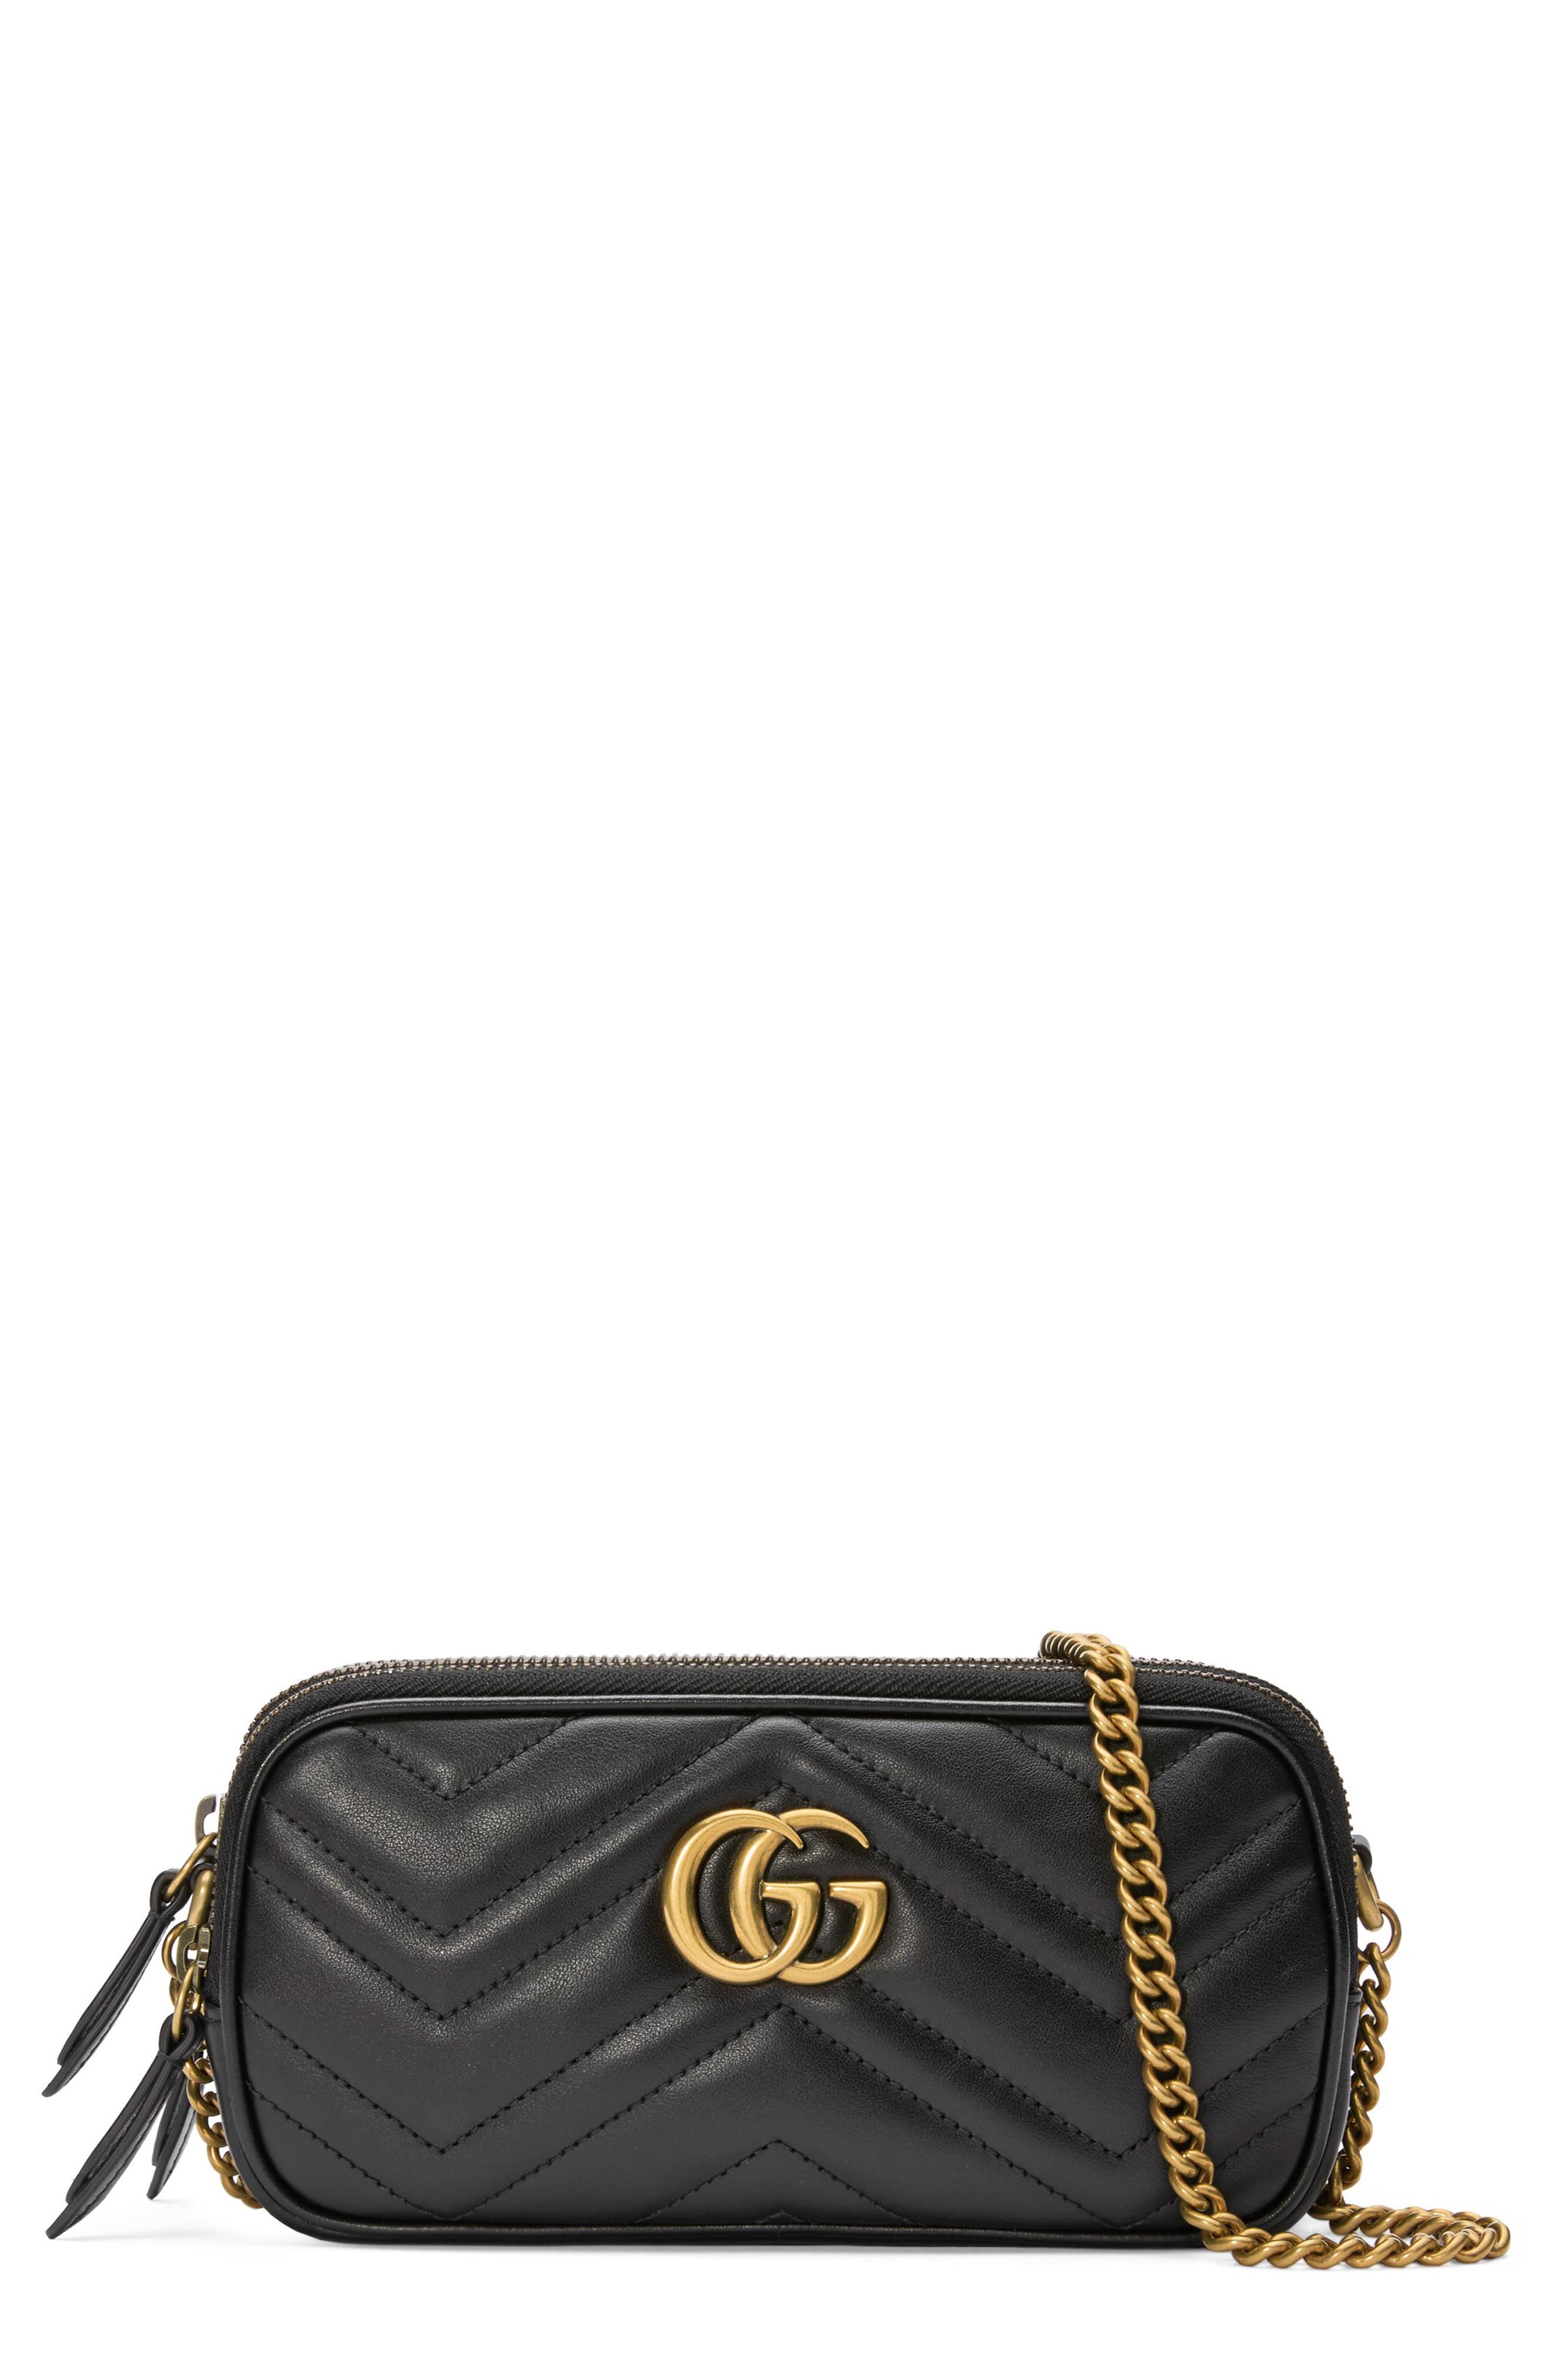 nordstrom gucci bags